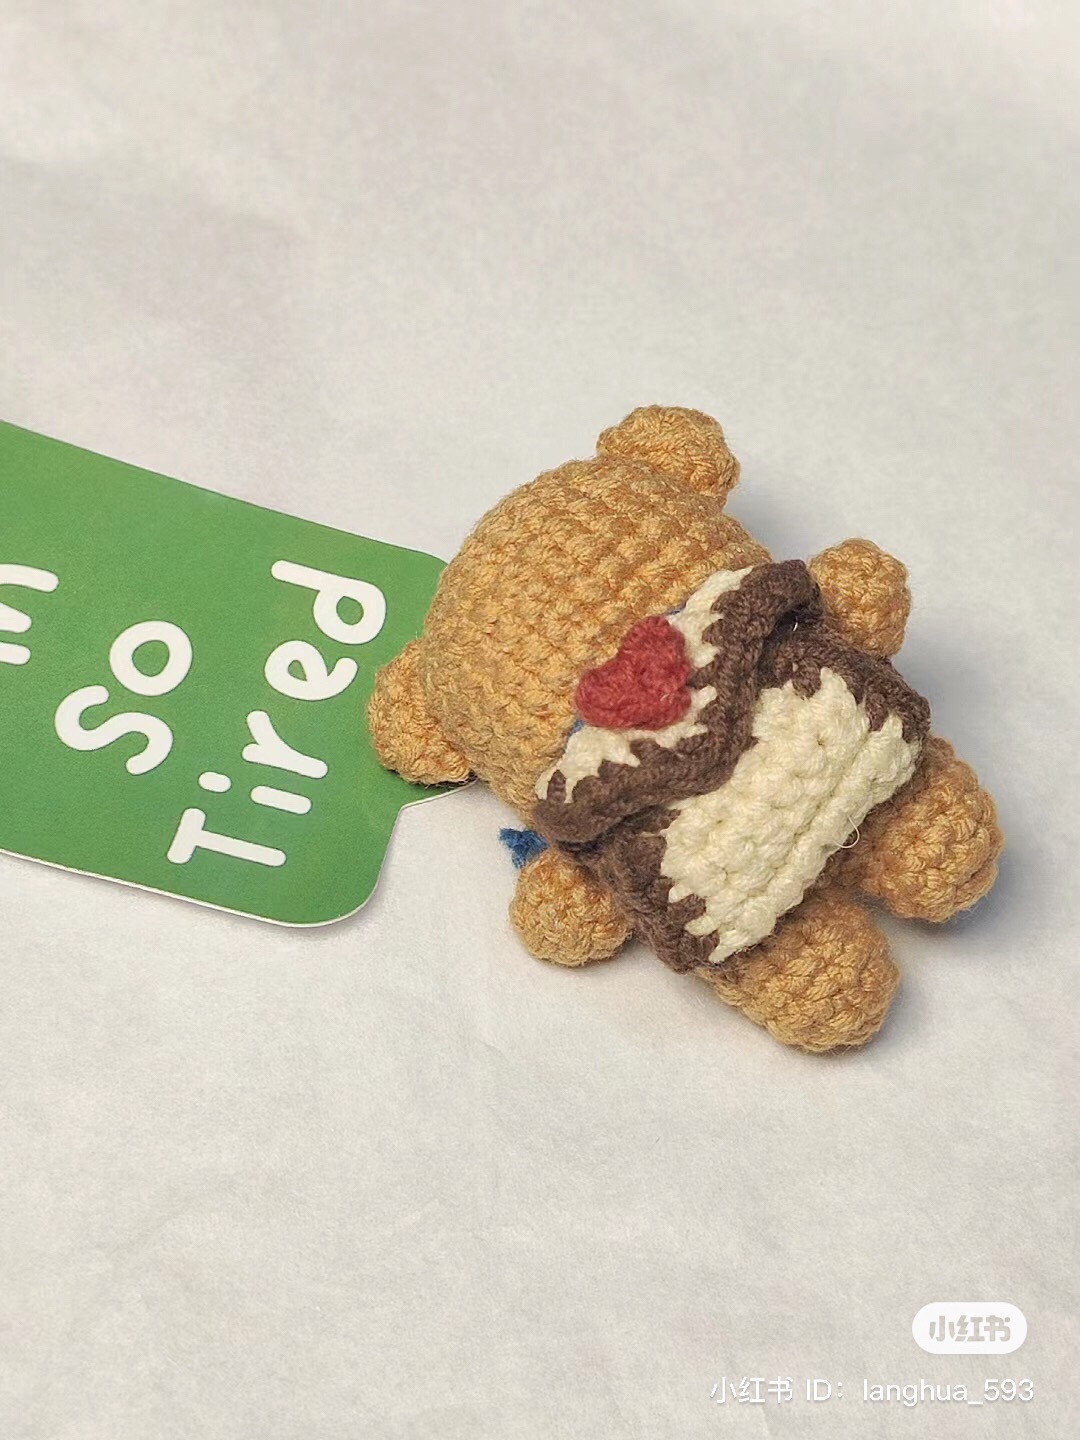 Crochet pattern for a brown bear wearing a green scarf and carrying a school bag